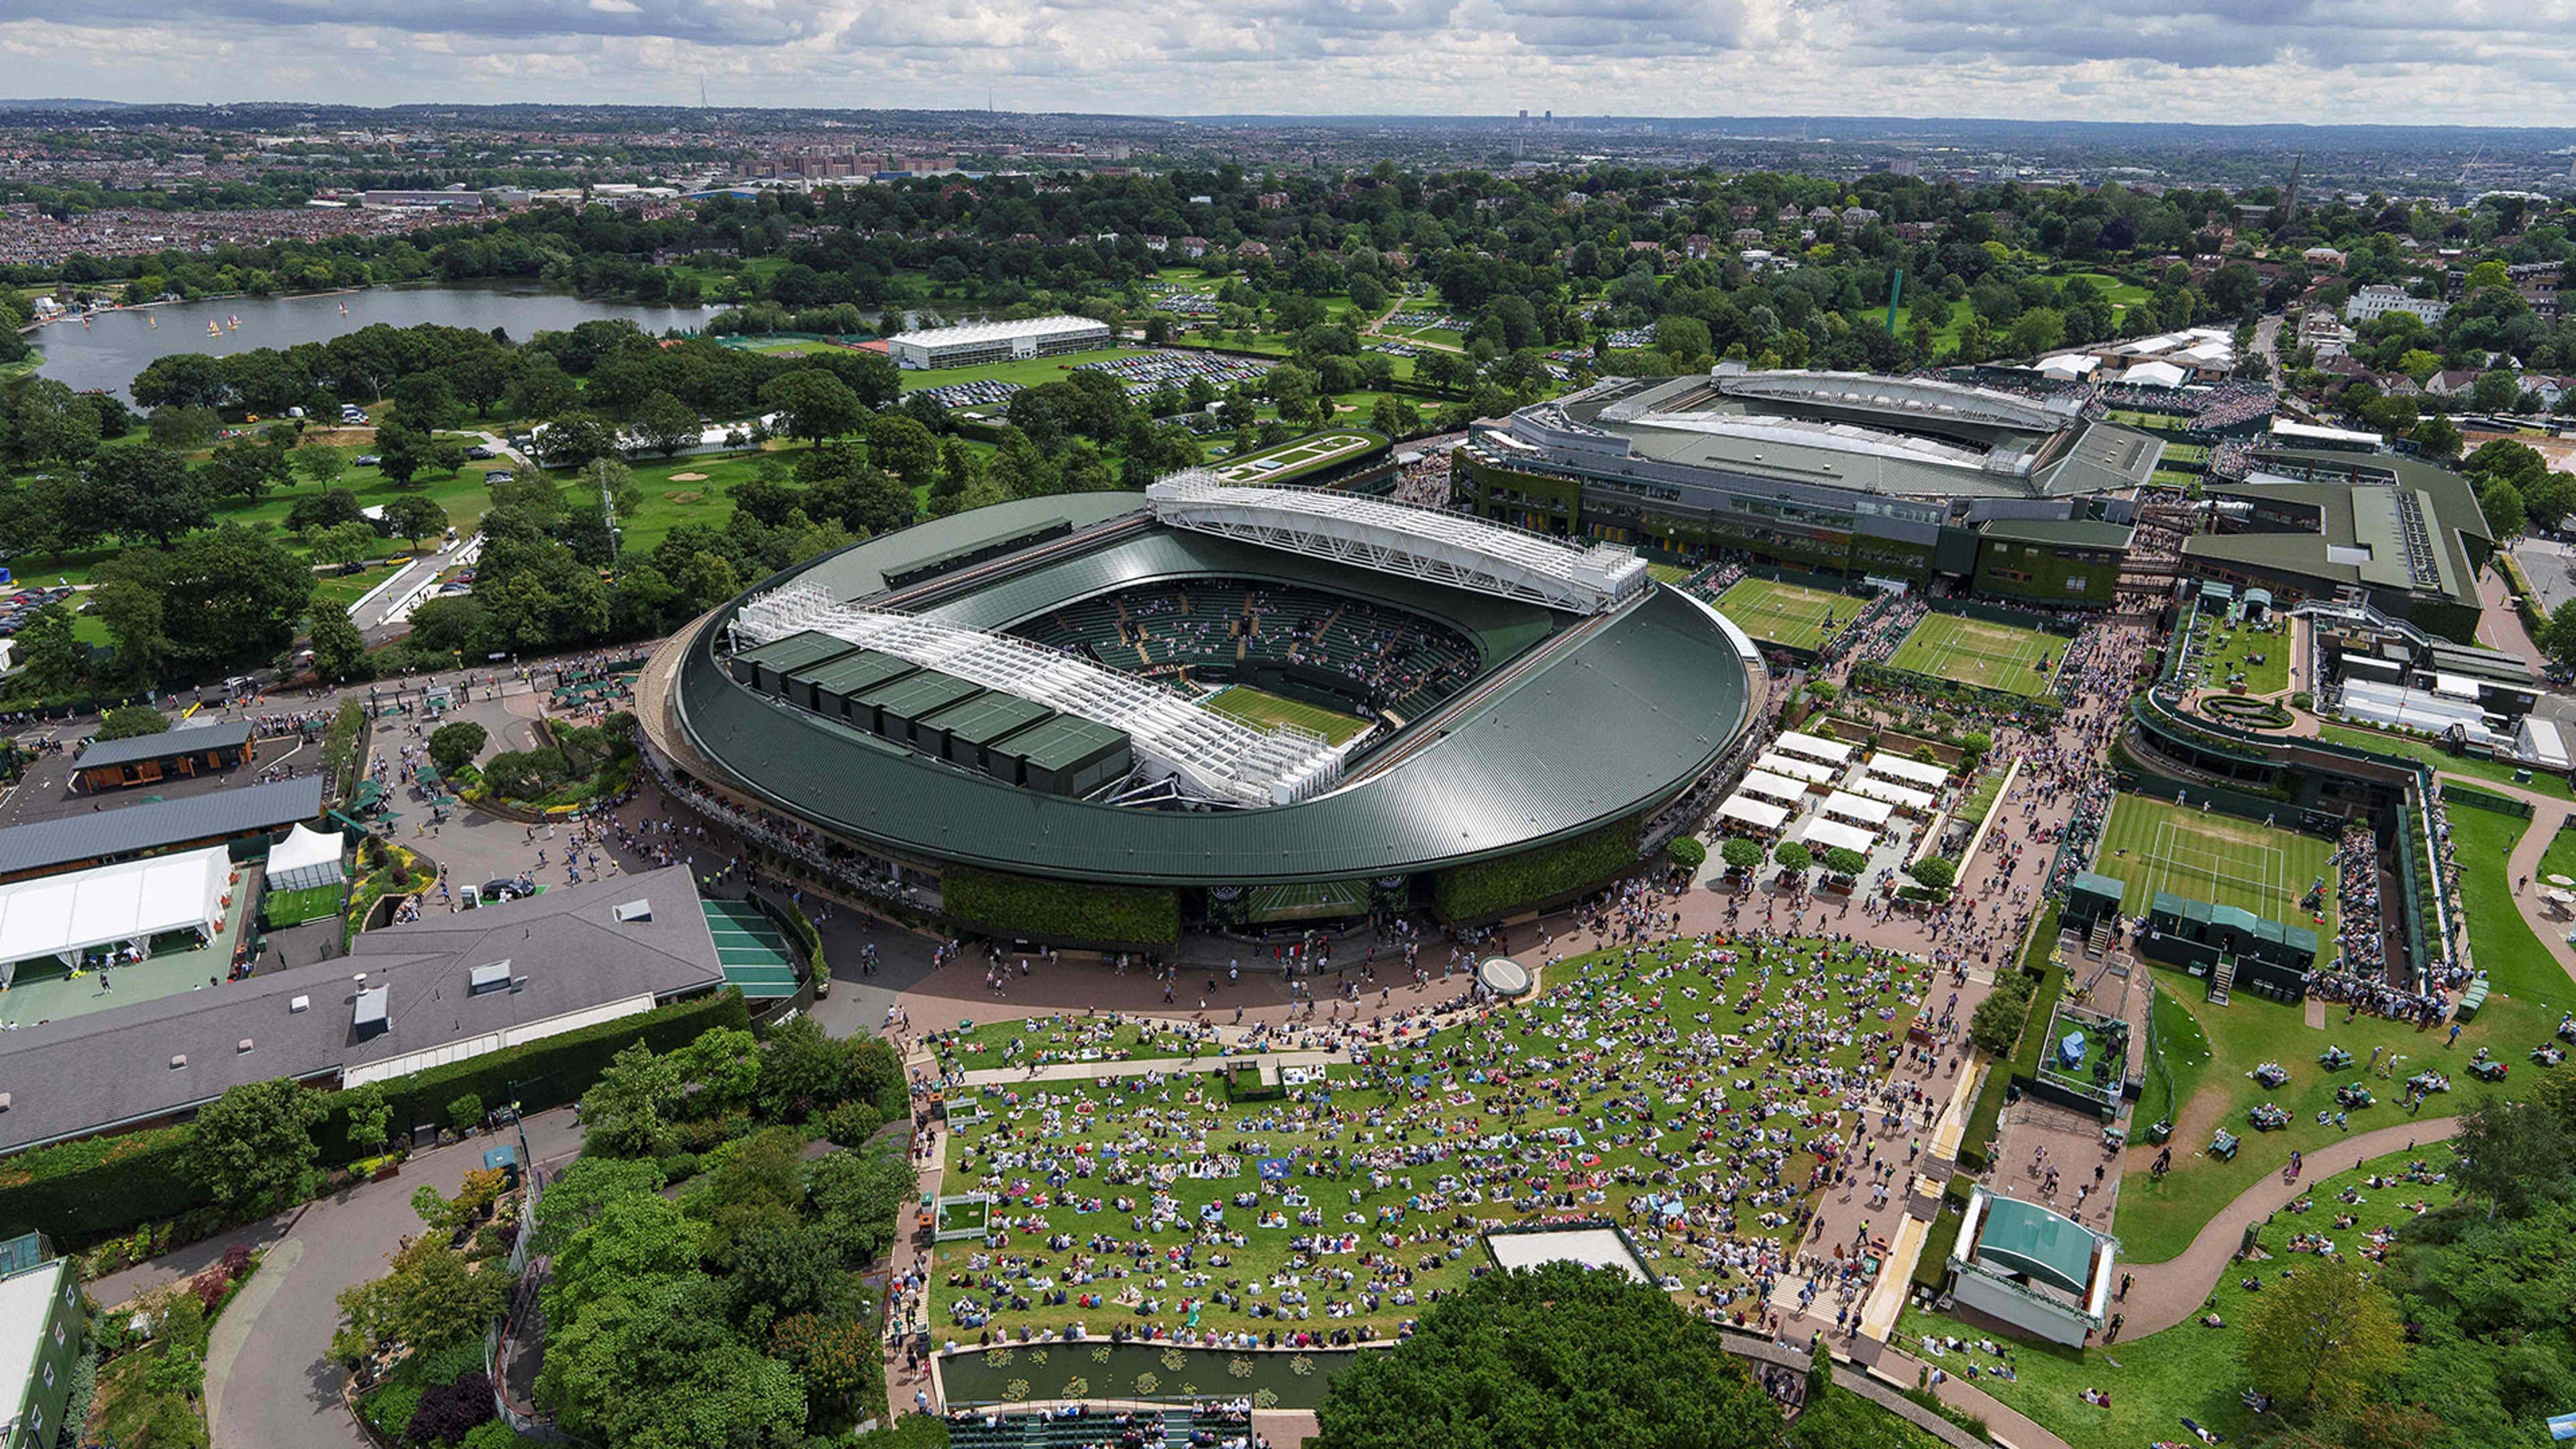 Wimbledon tickets prices, package deals, resales & more